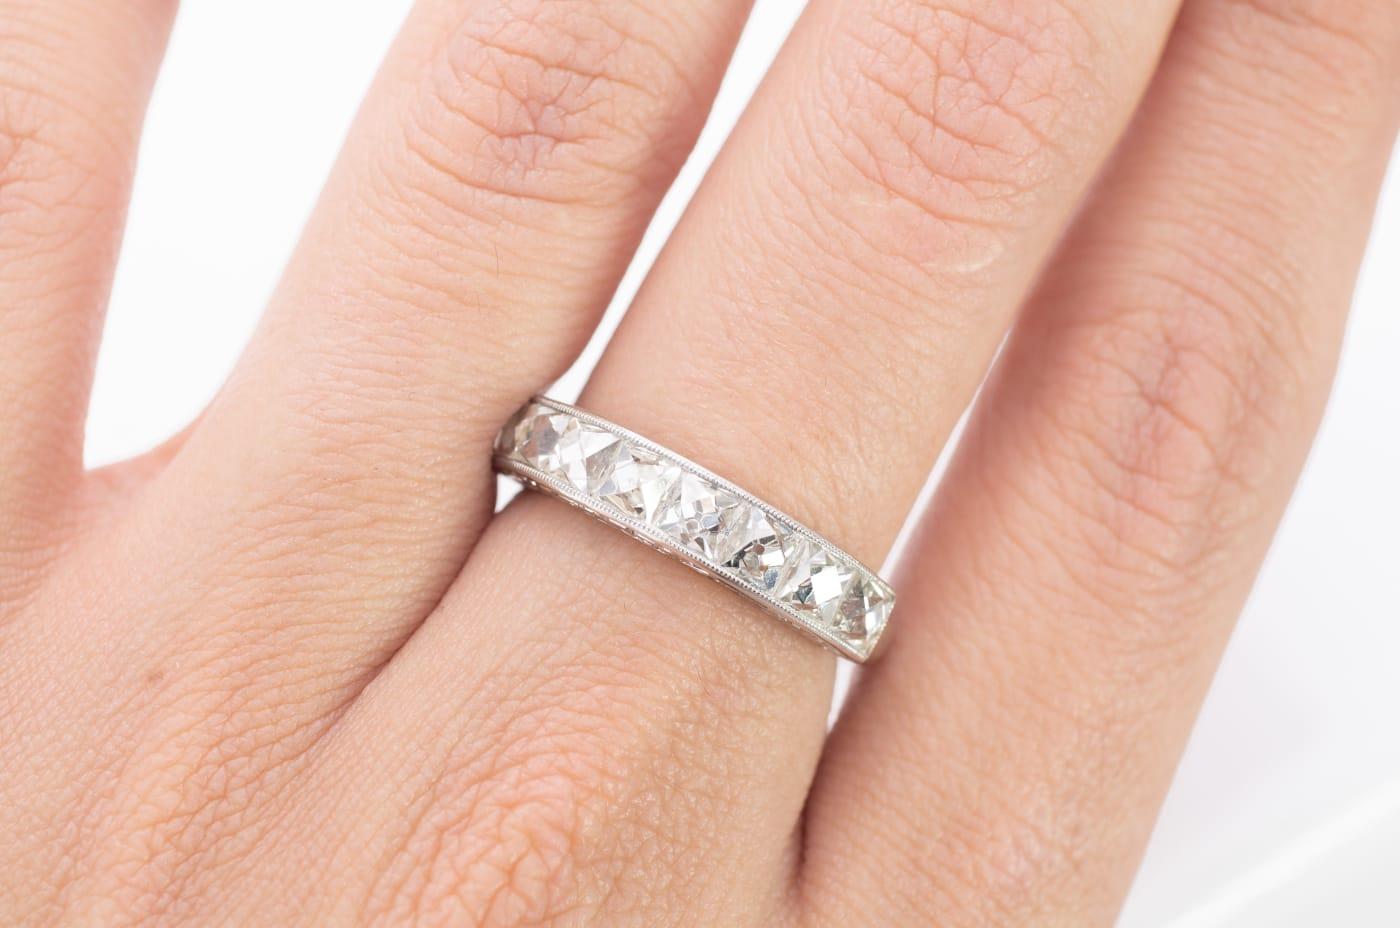 Art Deco Revival Handmade Platinum French Cut Diamonds Band In Excellent Condition For Sale In Miami, FL